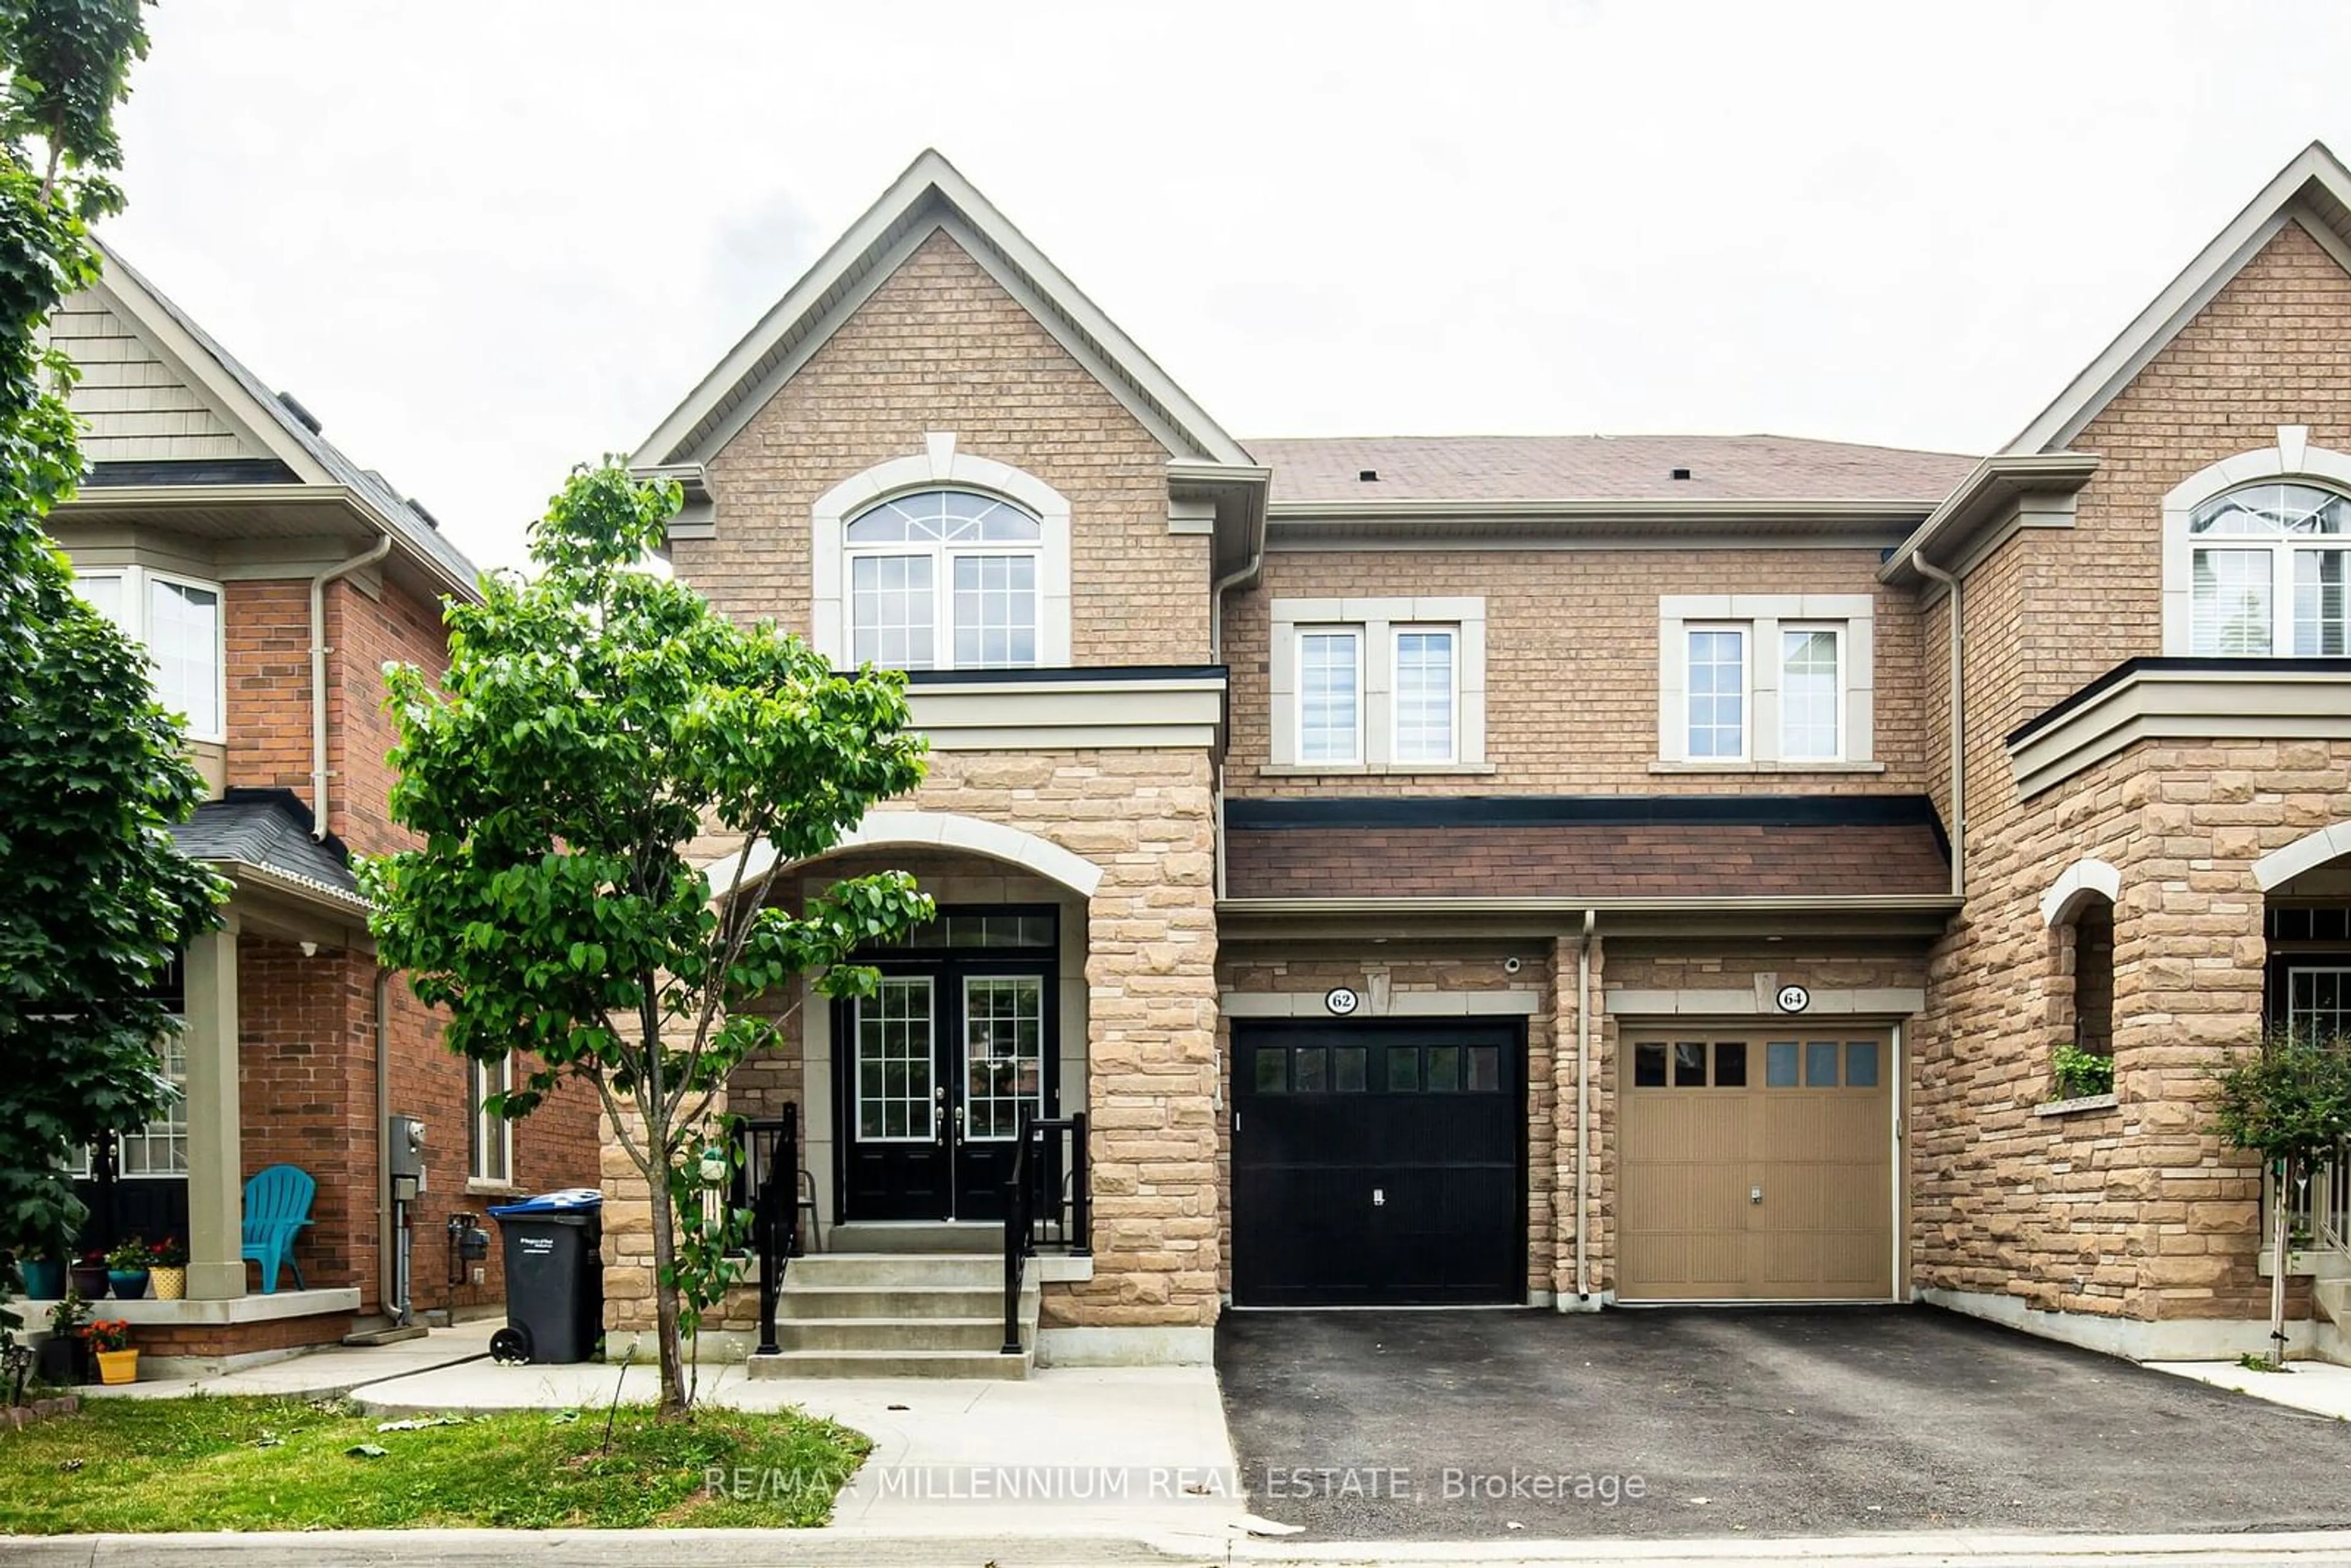 Home with brick exterior material for 62 Loftsmoor Dr, Brampton Ontario L6R 0W2